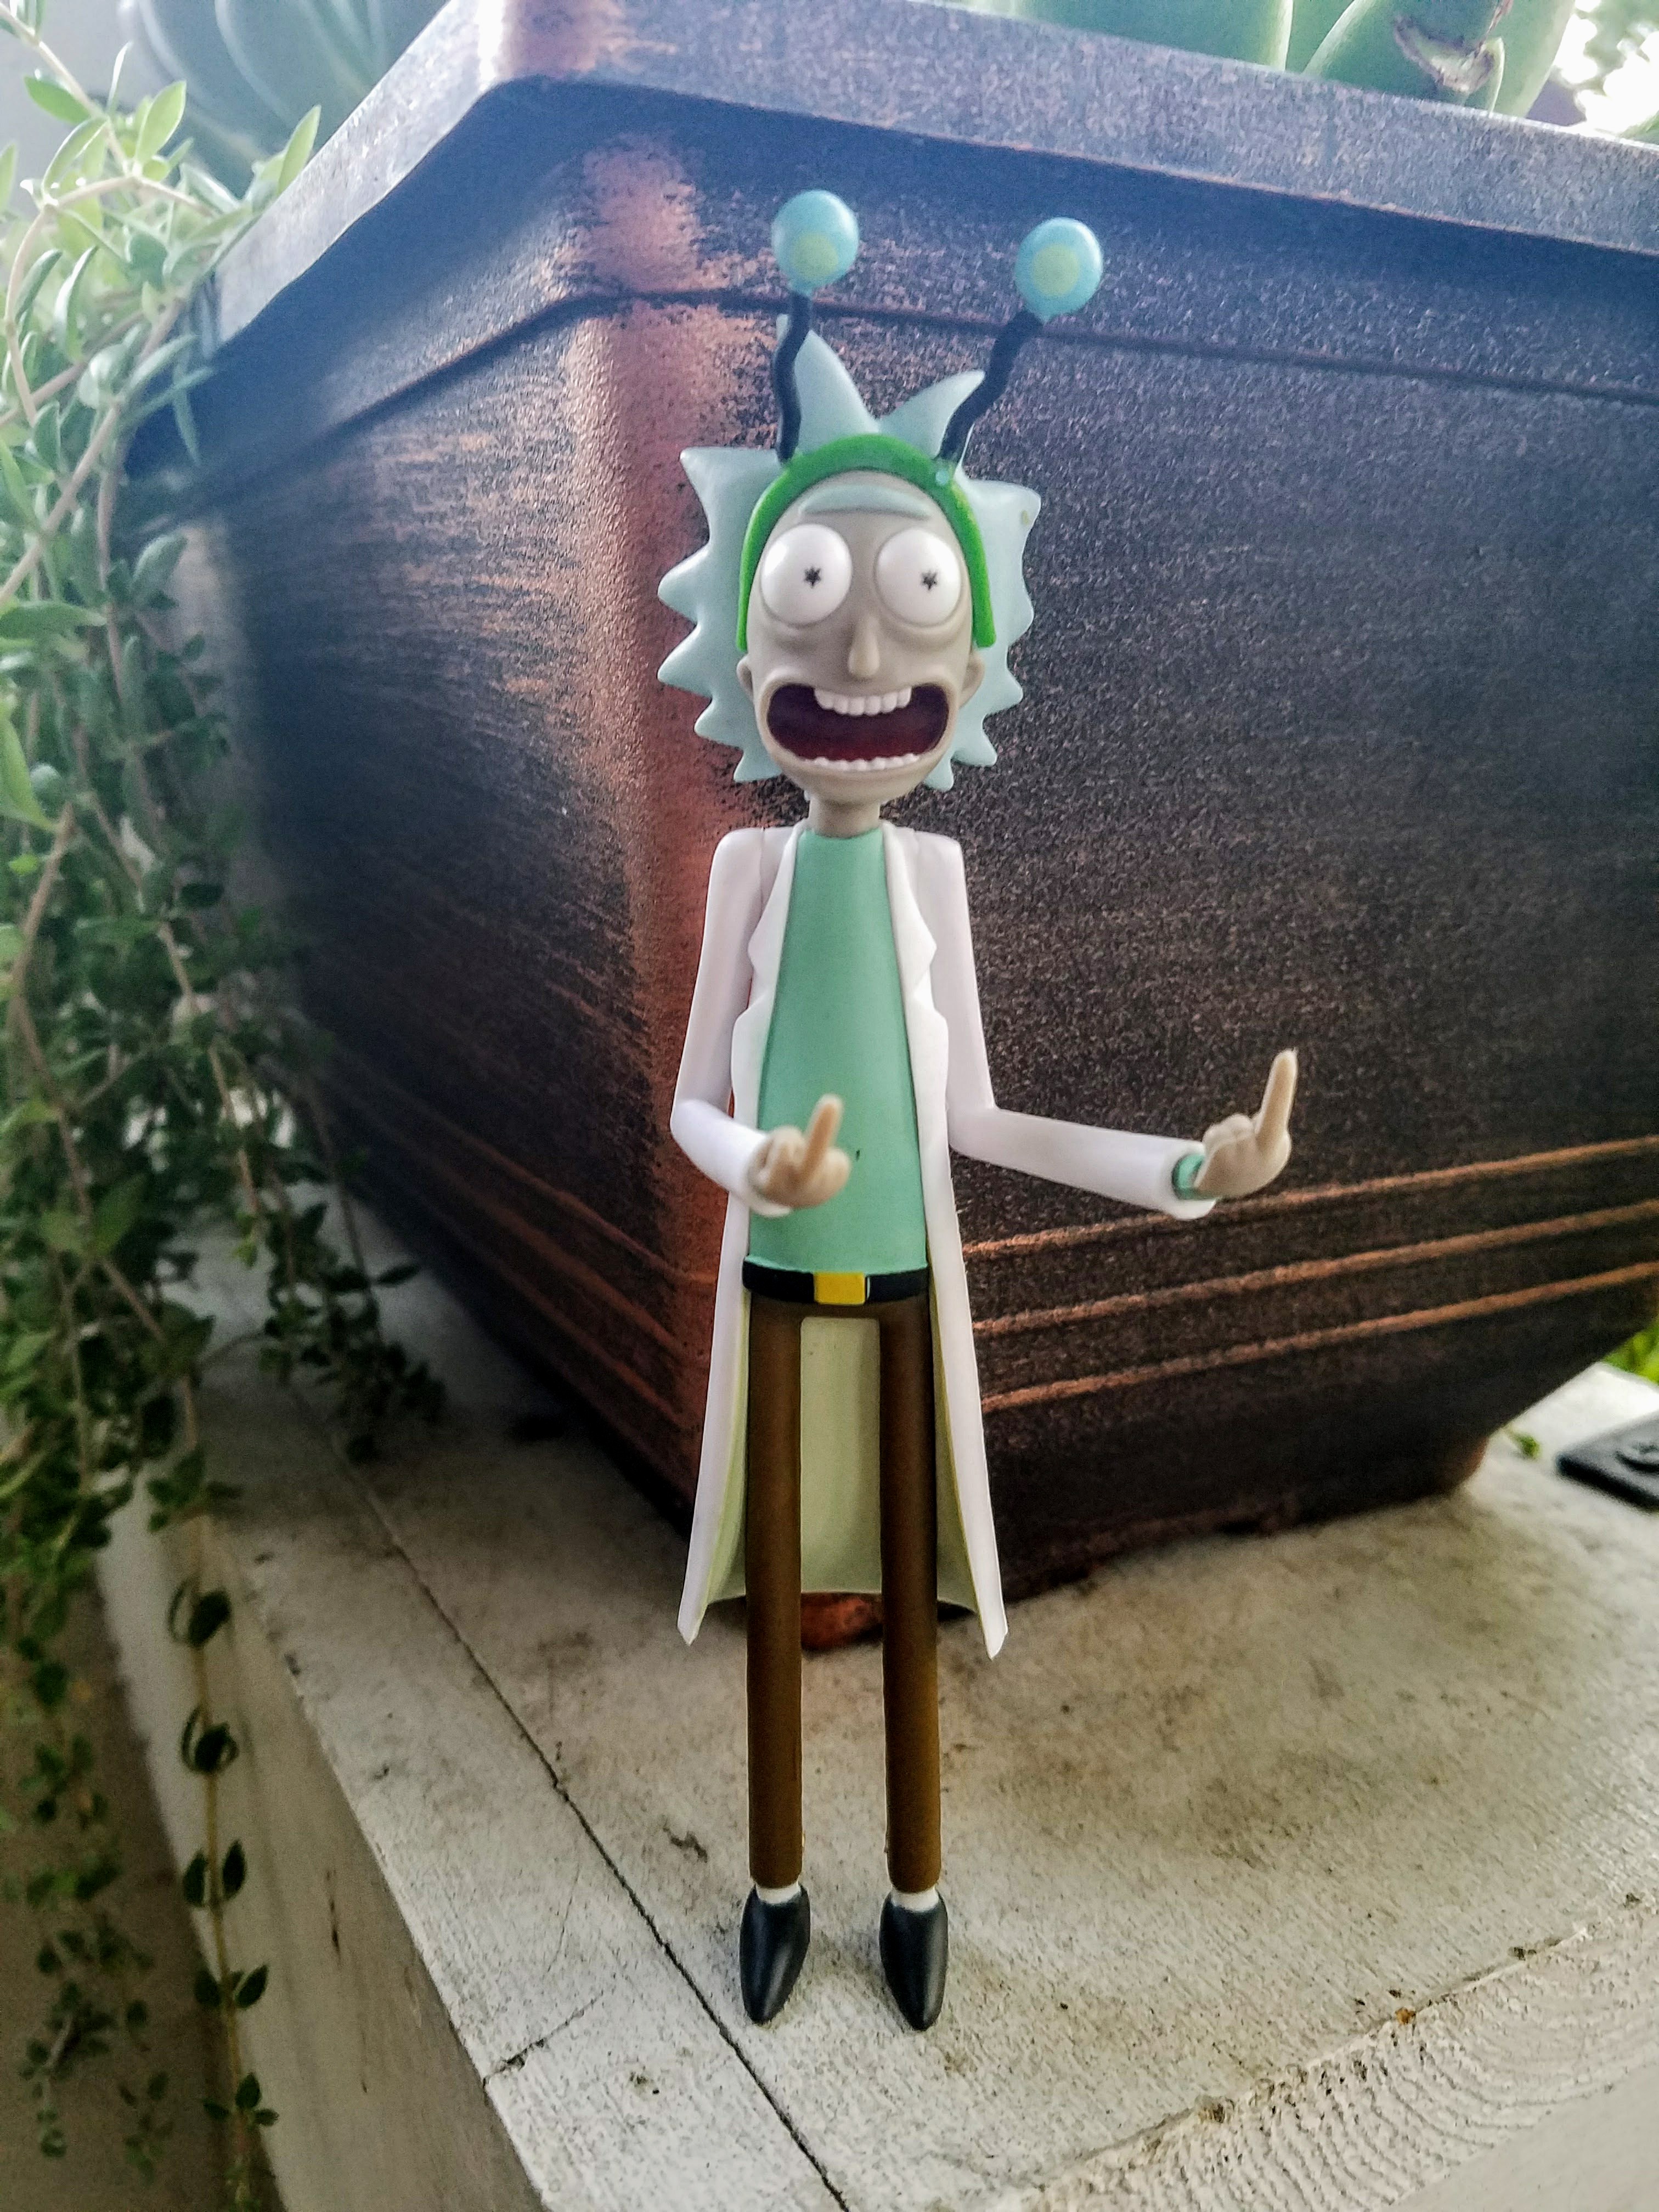 Rick Sanchez from Rick and Morty - Peace Among Worlds